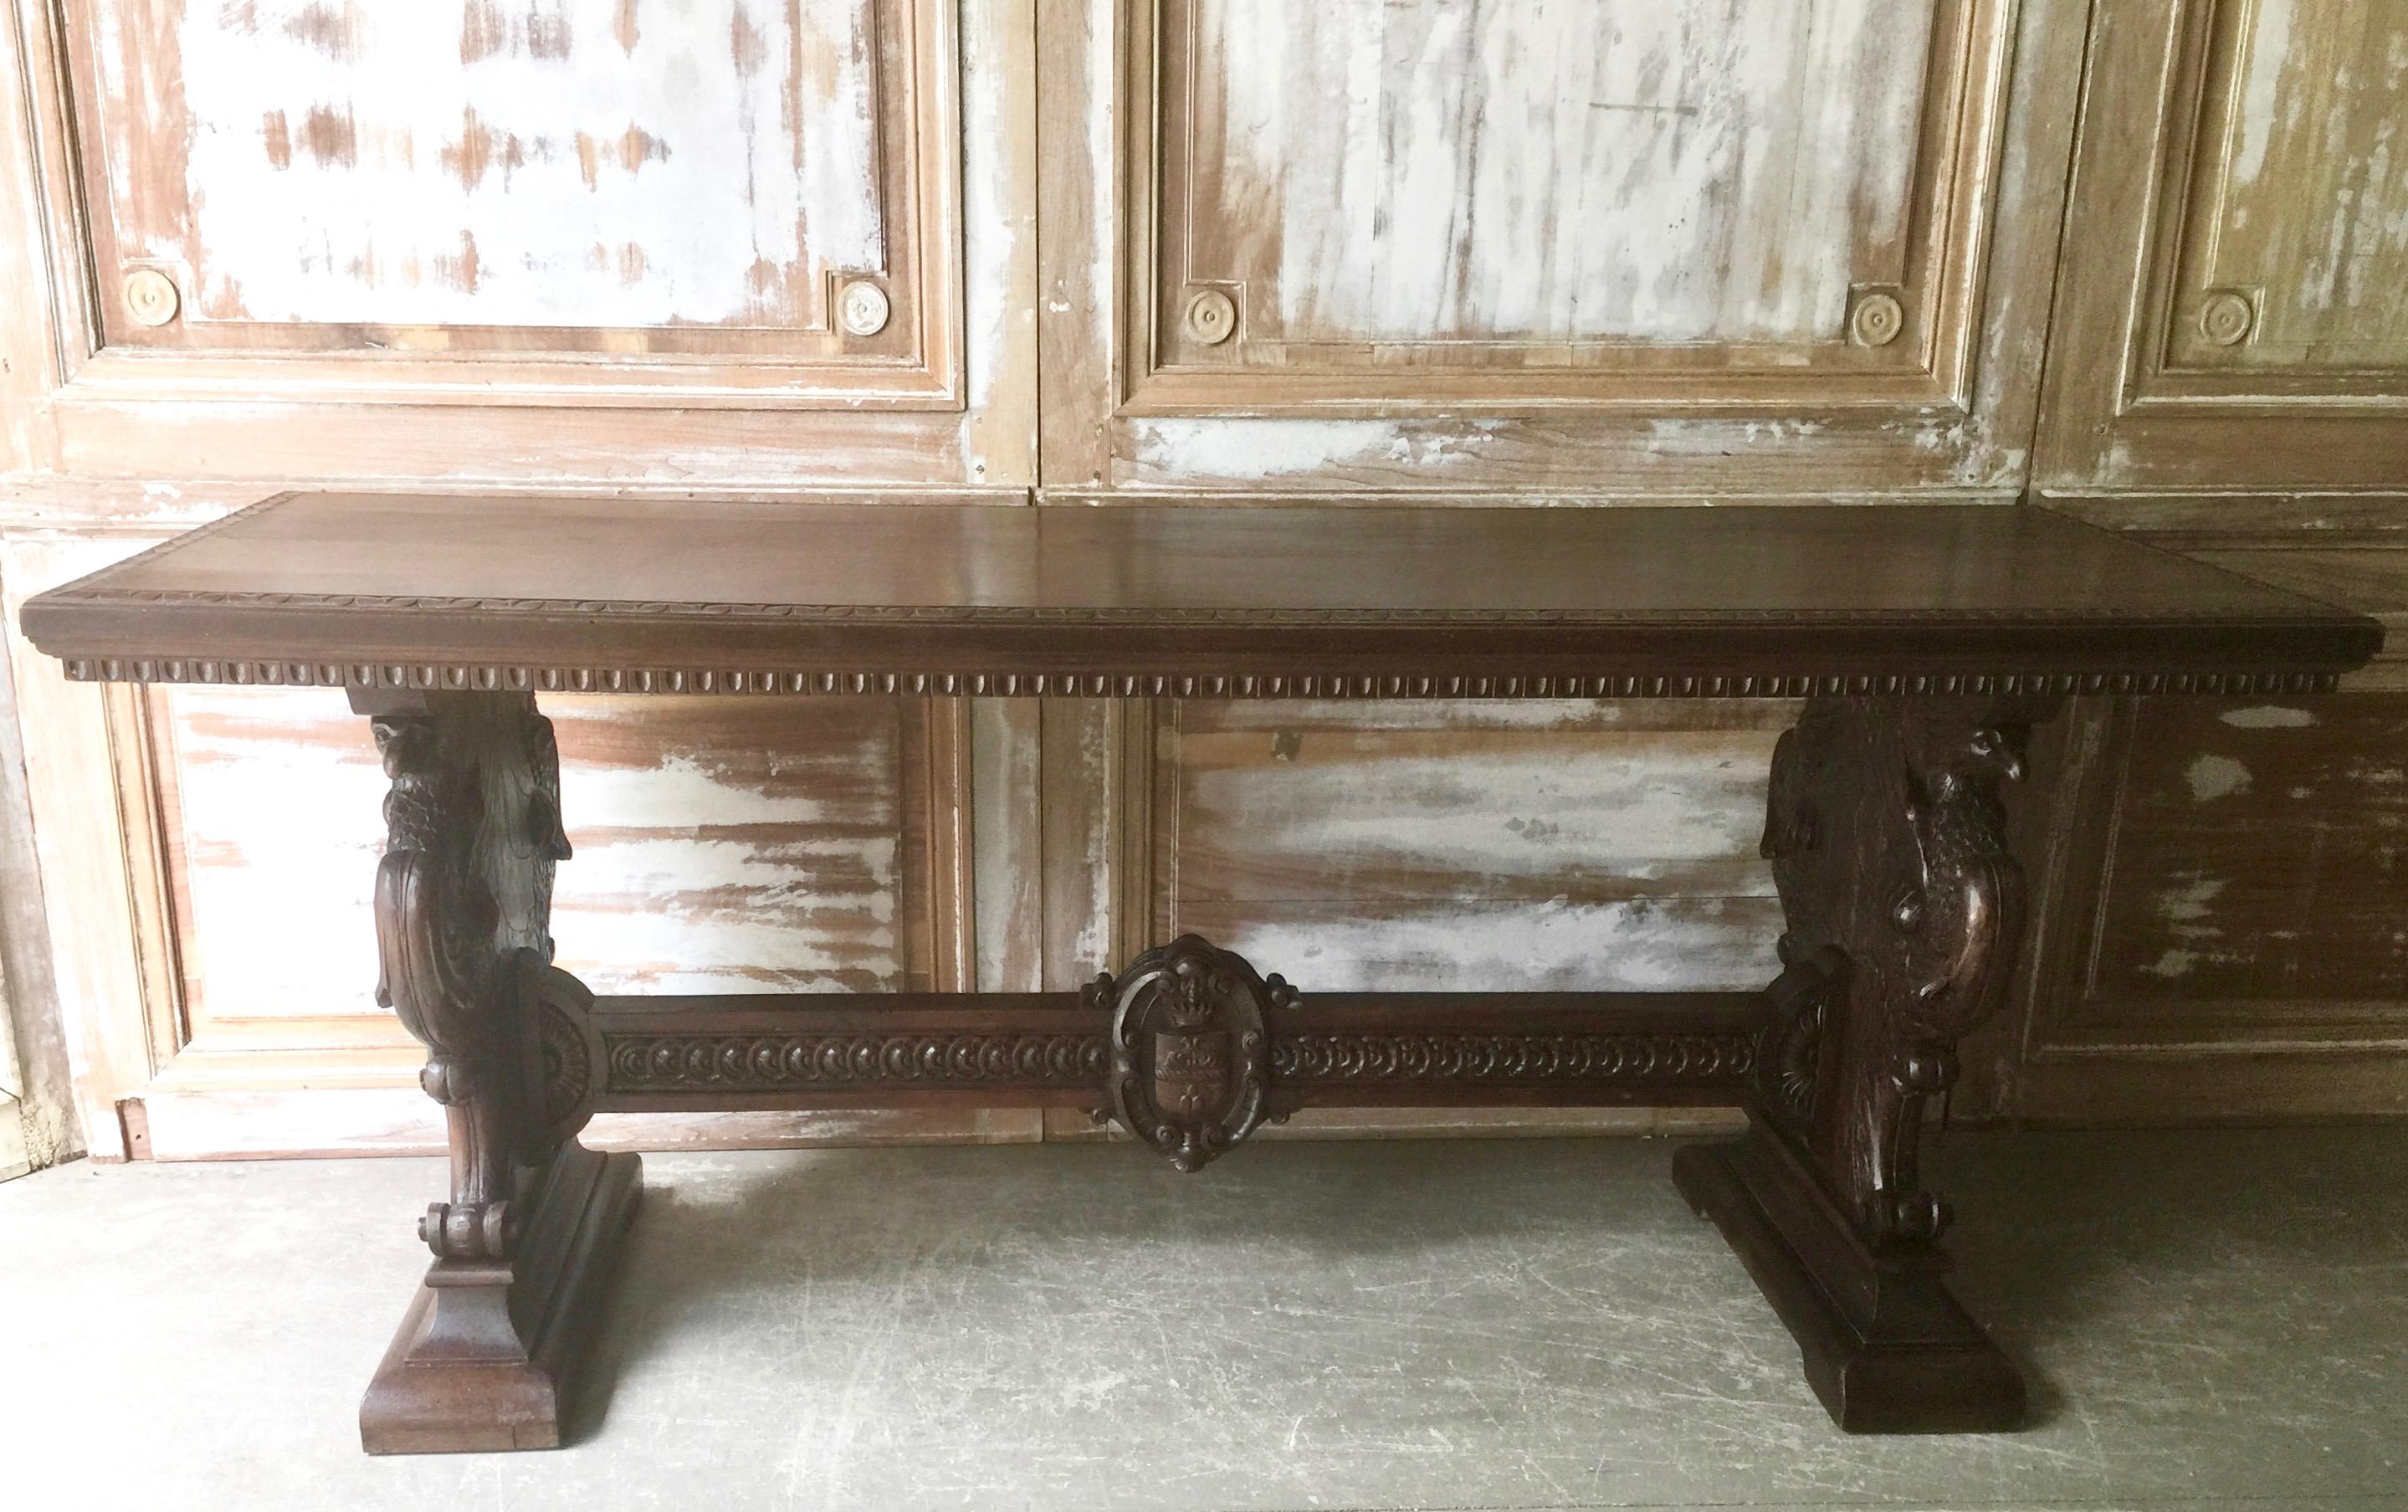 19th century extravagantly-carved Italian Renaissance-Revival library table in walnut witch carved trestle ends with griffins, female busts, northwind faces, shields, scrolls and crowns connected by a carved stretcher with the crest under the